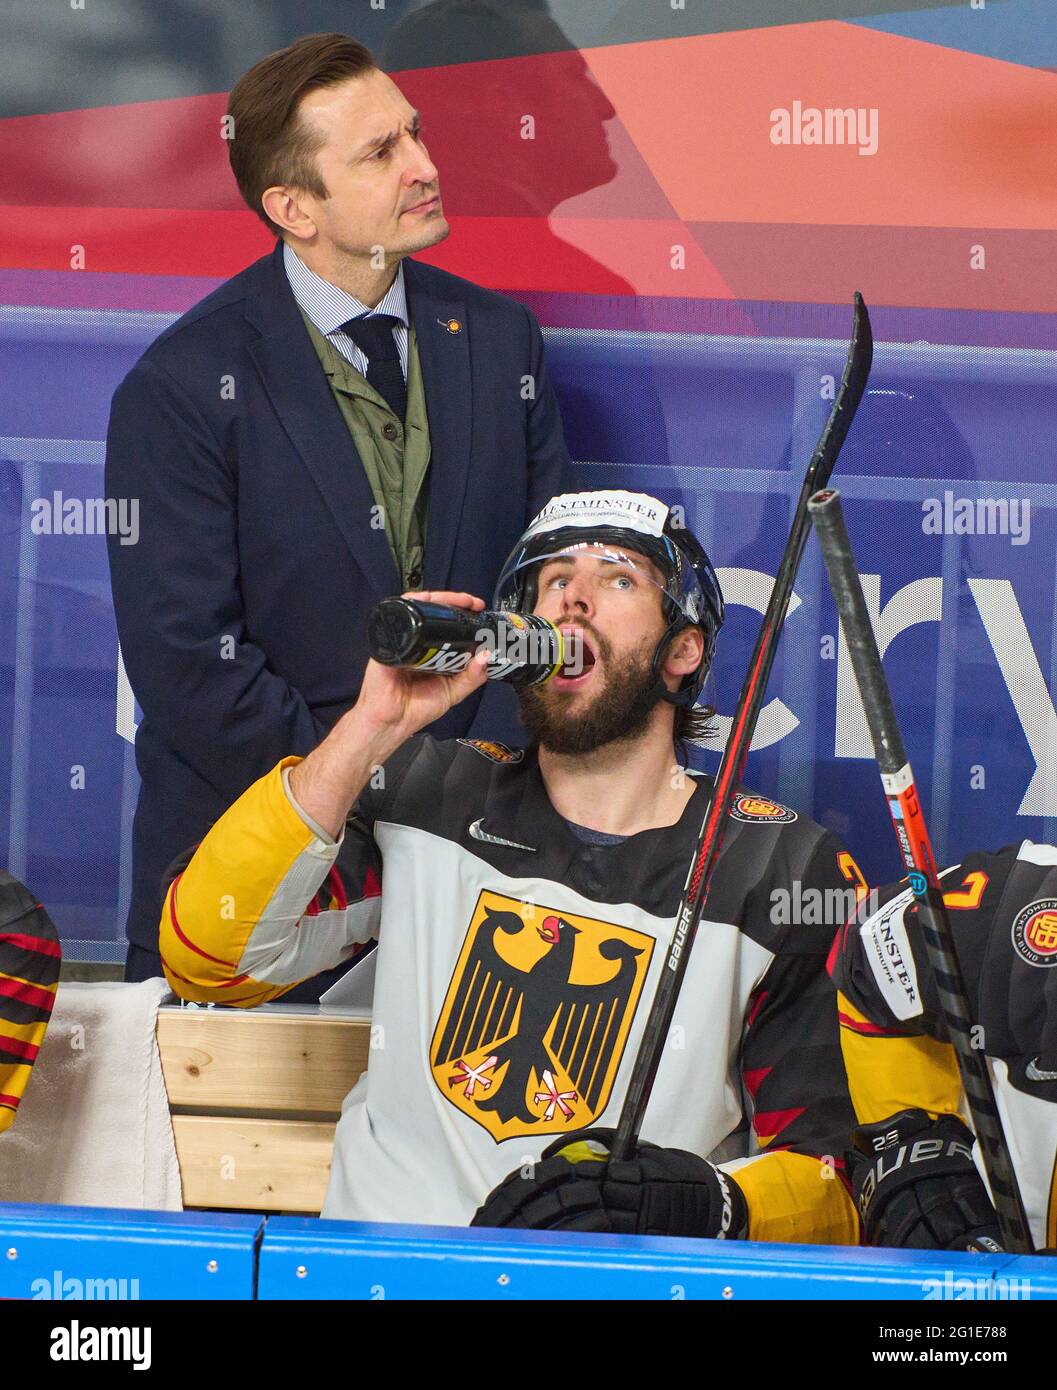 Riga, Latvia. 06th June, 2021. Ville PELTONEN, Matthias Plachta #22 of Germany drinks from water bottle, thirst, thirsty, liquid, thirst quencher, isotonic, nutrition, sports nutrition, electrolyte balance, wasser, trinken, getränk, USA - GERMANY 6-1 IIHF ICE HOCKEY WORLD CHAMPIONSHIPS Final for 3rd place in Riga, Latvia, Lettland, June 6, 2021, Season 2020/2021 Credit: Peter Schatz/Alamy Live News Stock Photo